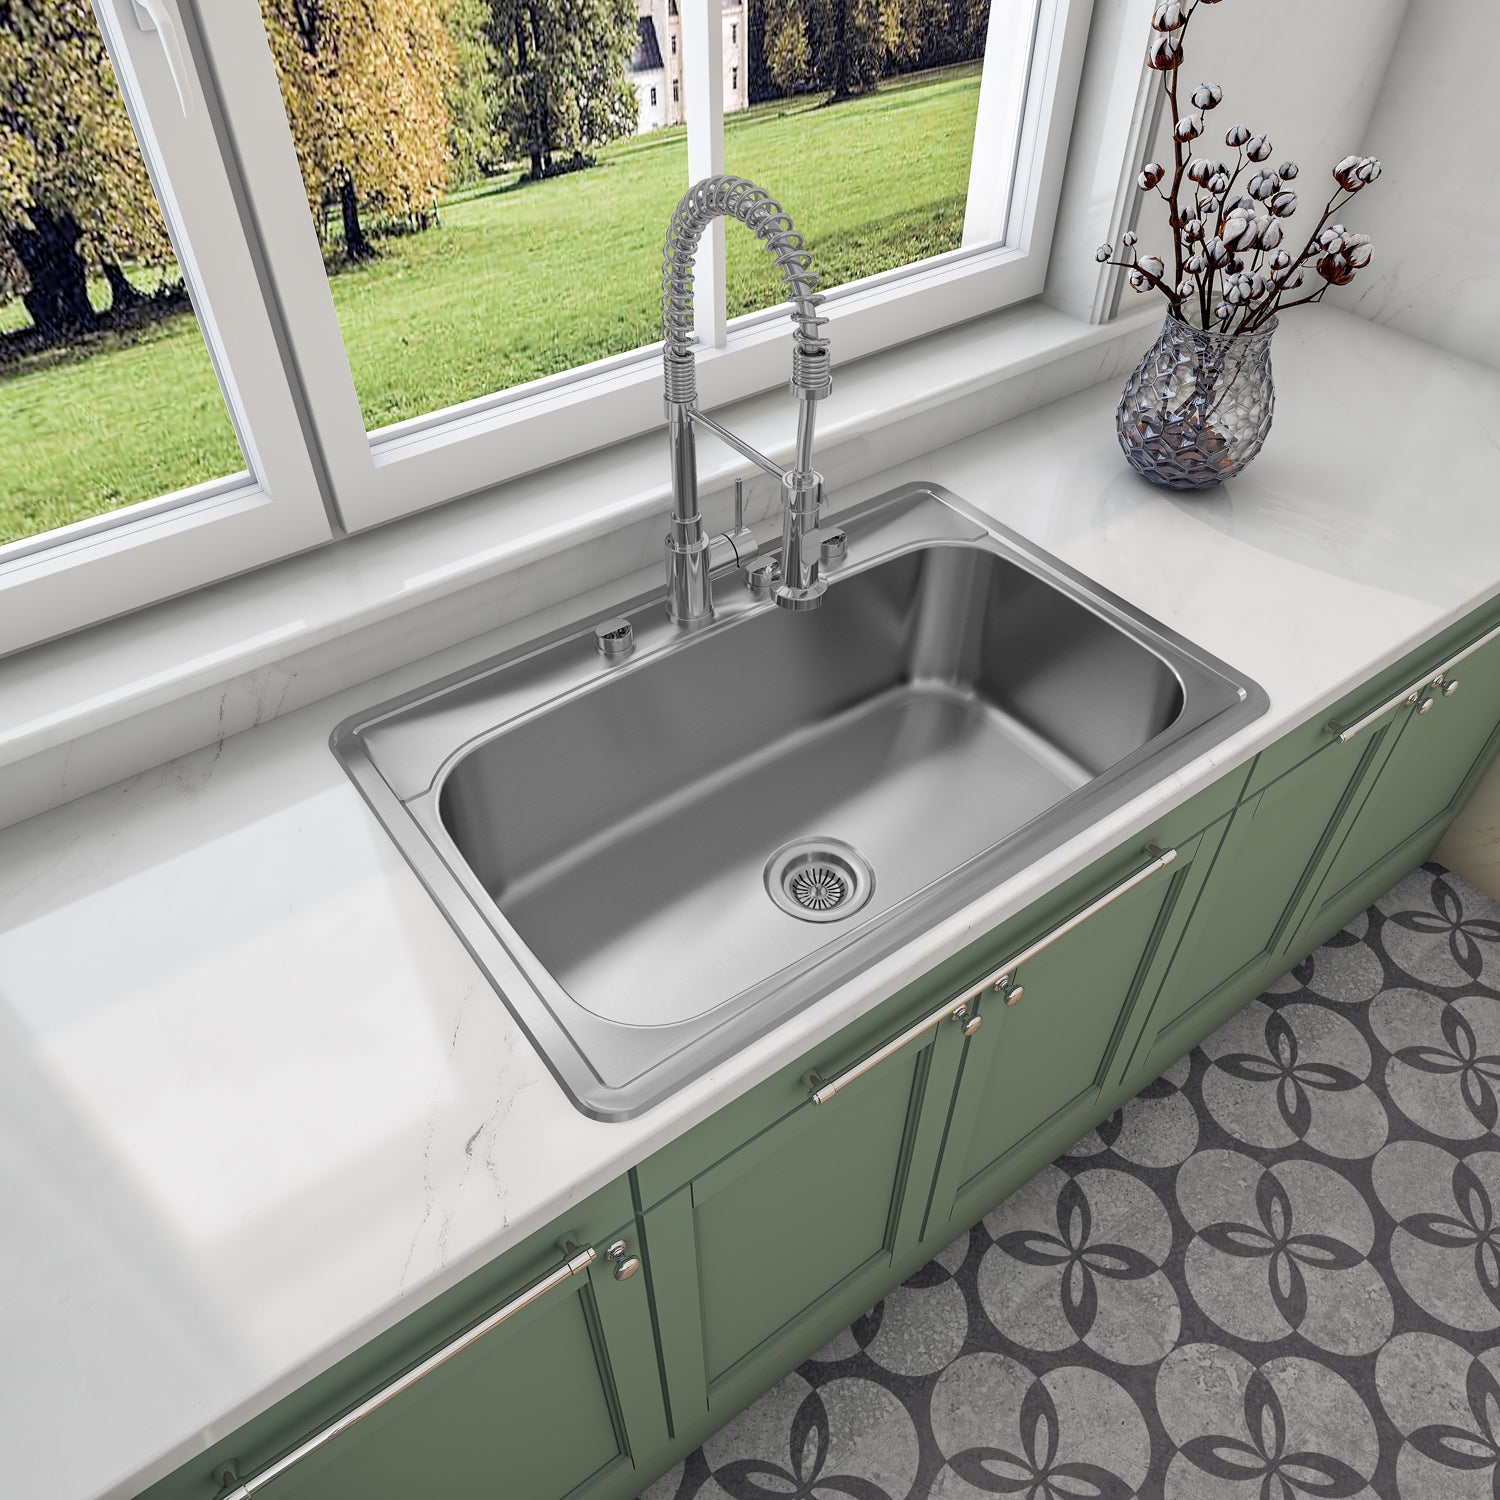 Sinber 33" x 22" x 9" Drop In Single Bowl Kitchen Sink with 18 Gauge 304 Stainless Steel Satin Finish MT3322C (Sink Only)